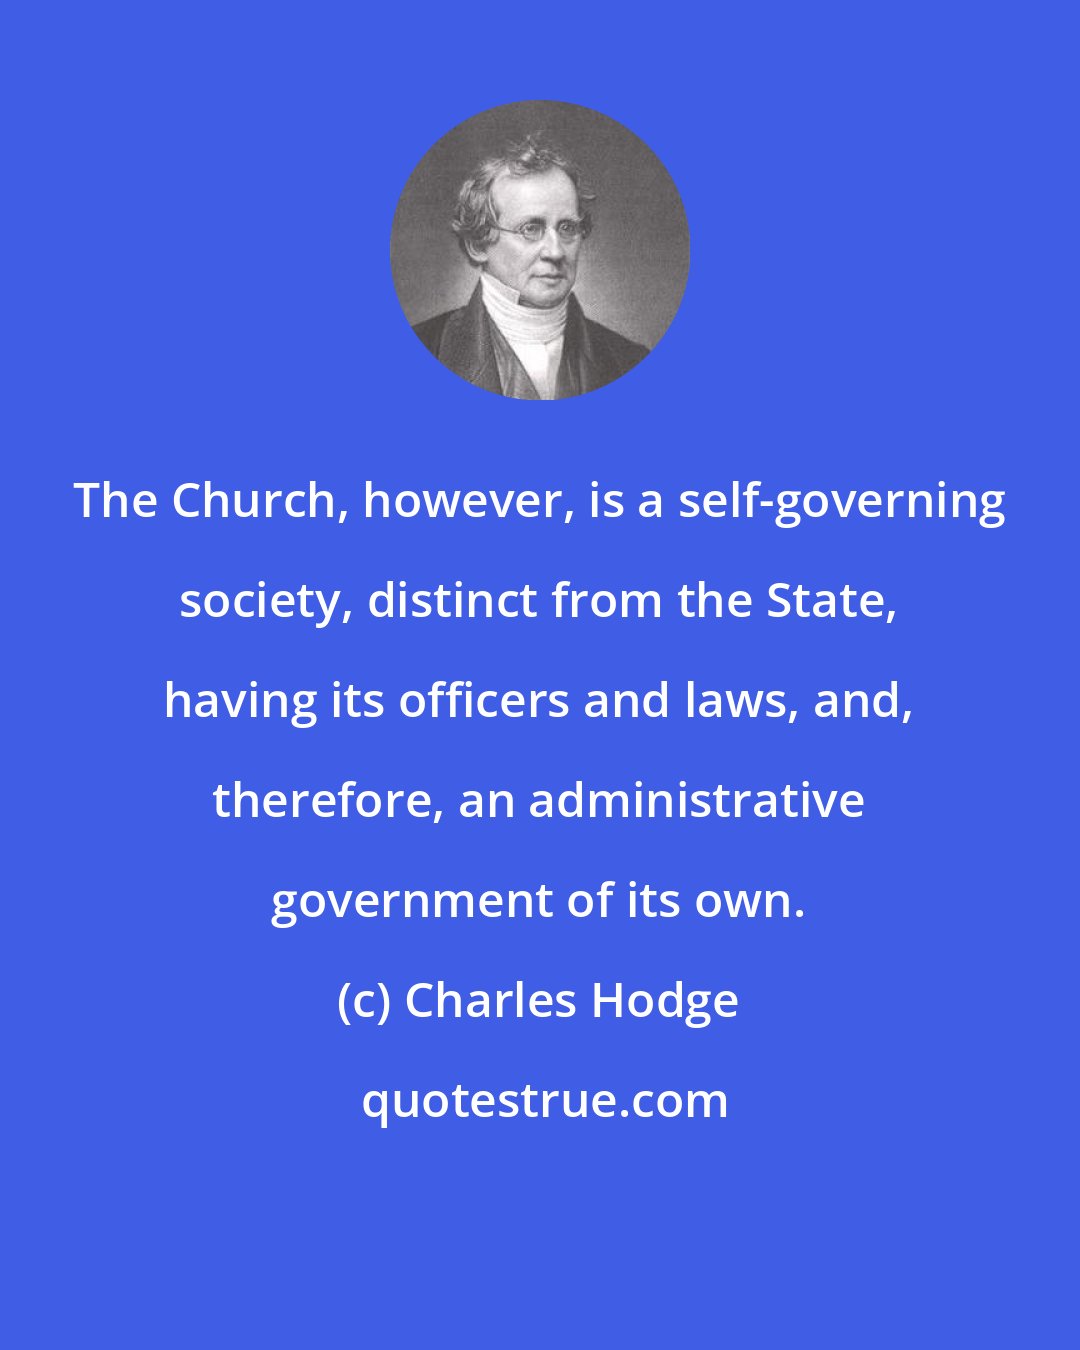 Charles Hodge: The Church, however, is a self-governing society, distinct from the State, having its officers and laws, and, therefore, an administrative government of its own.